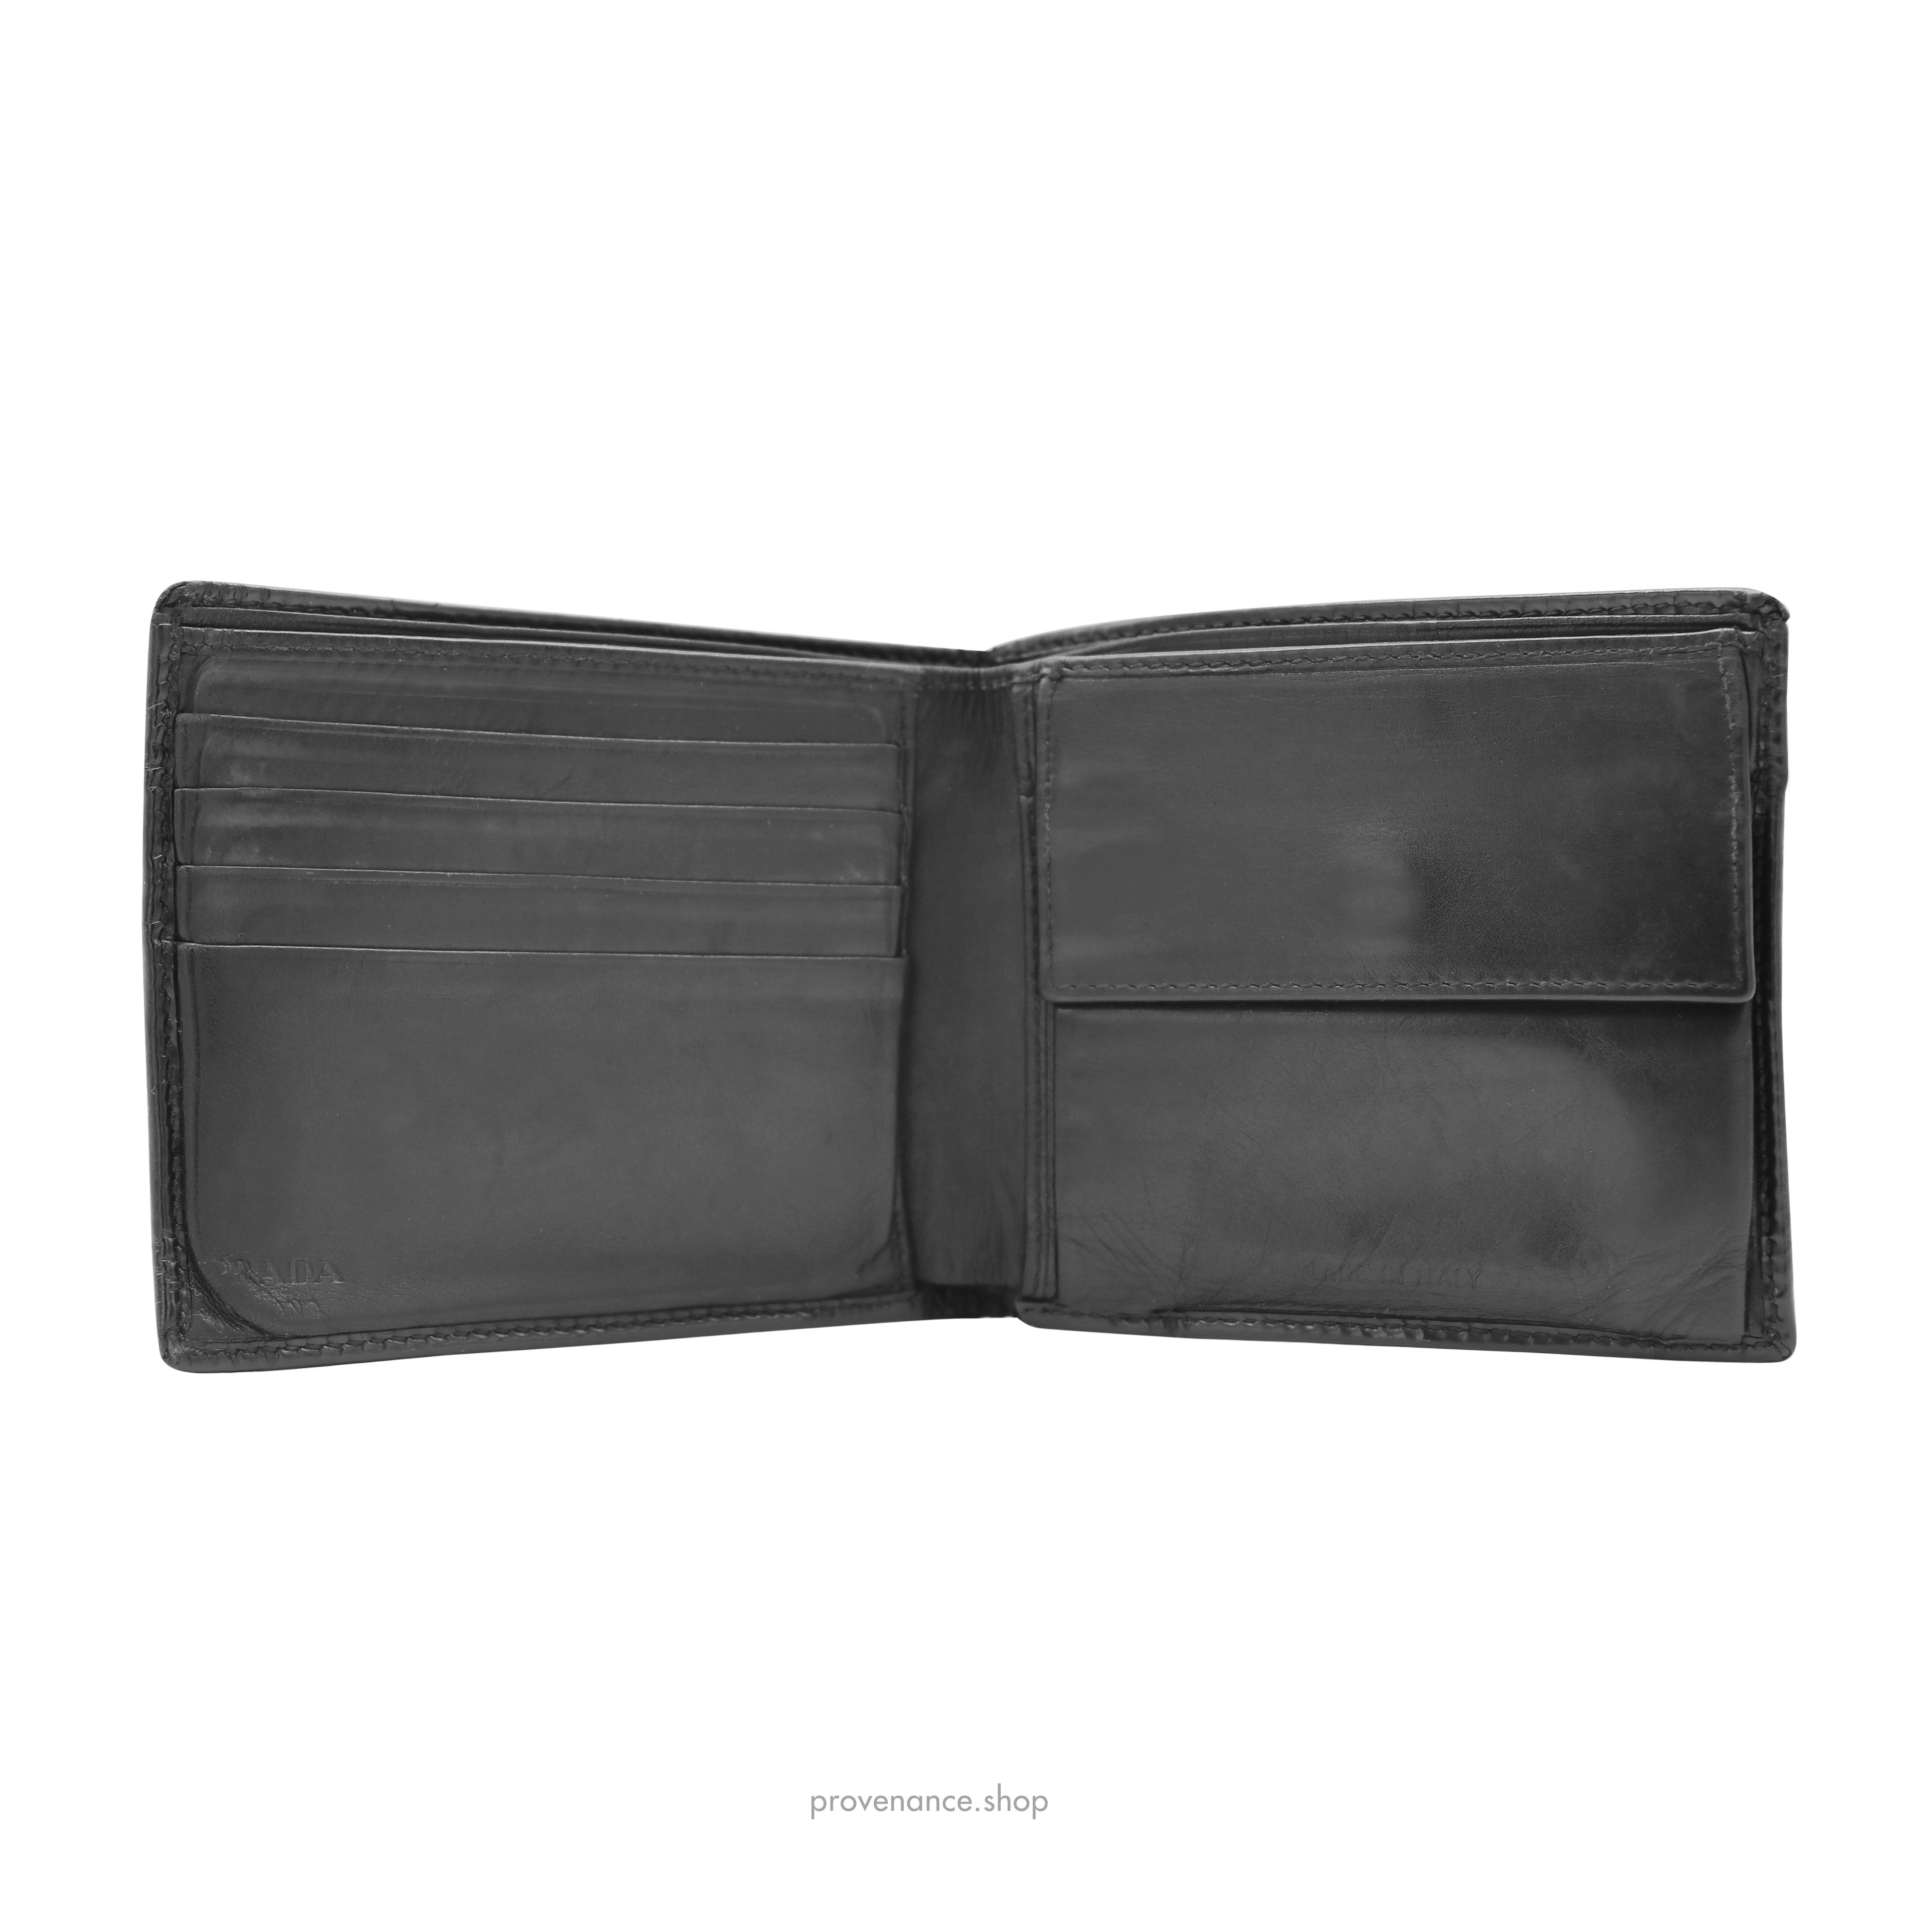 Bifold Wallet - Black Patent Leather - 6